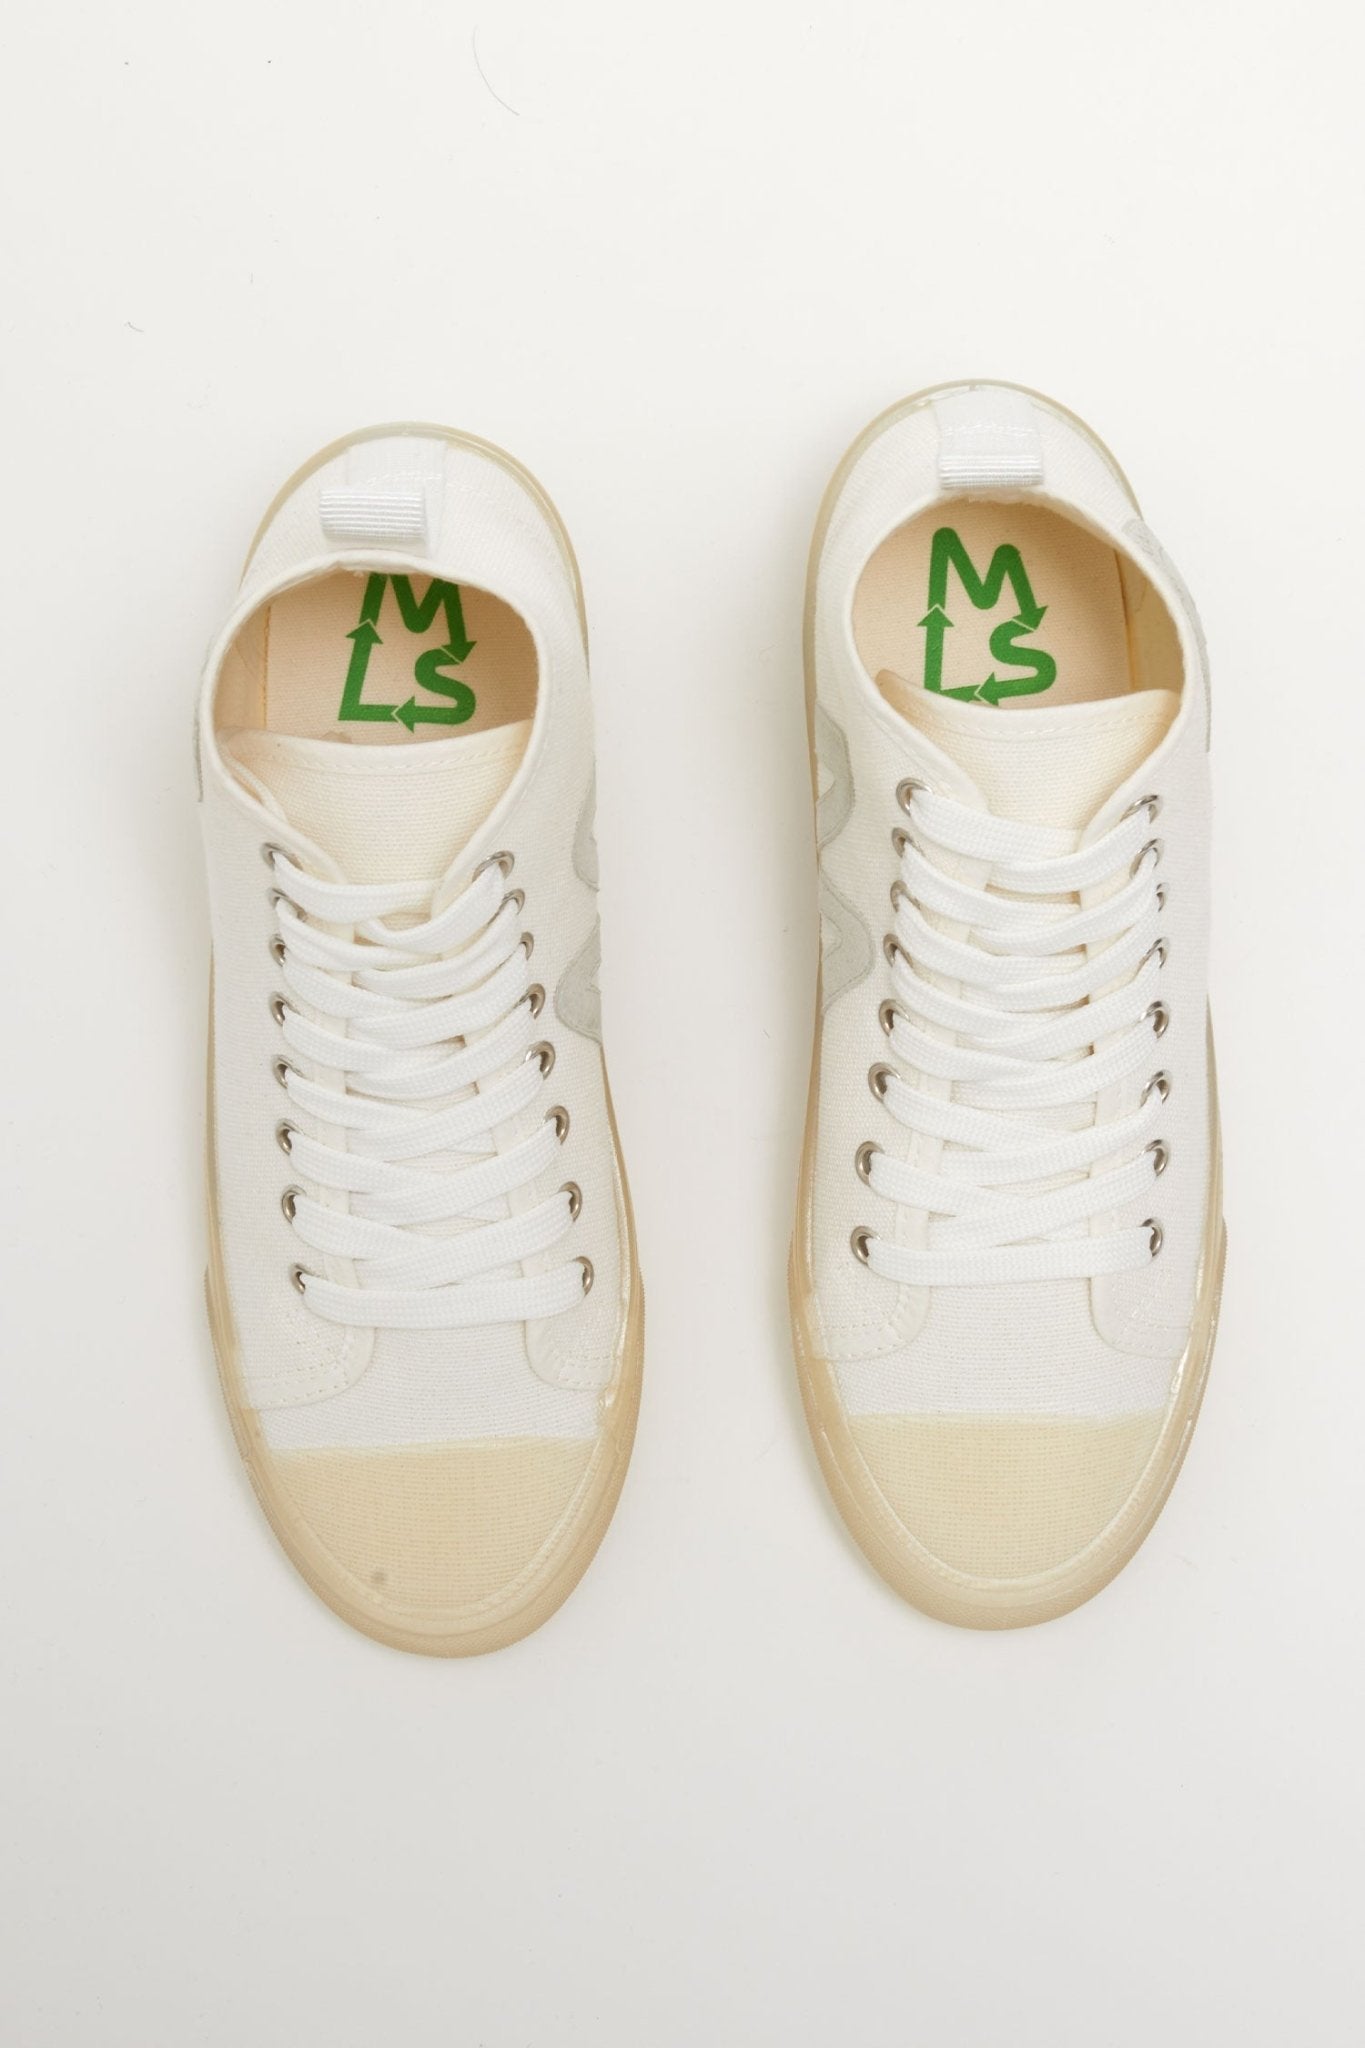 Classic High Top Sneakers With Toe Cap - Magnlens